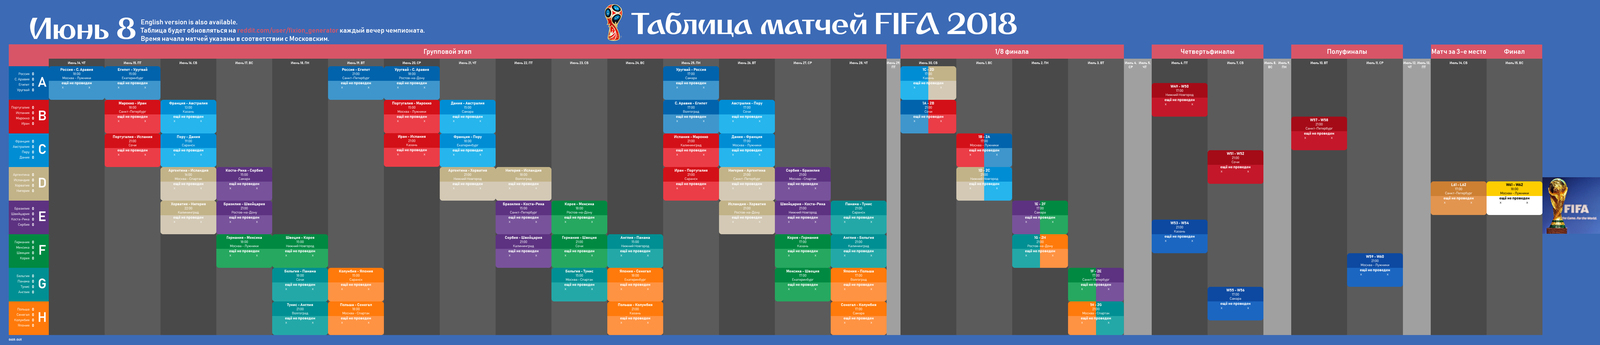 Table of matches of the FIFA World Cup 2018 by day (version 8 June) - My, World championship, 2018 FIFA World Cup, FIFA, Football, Championship